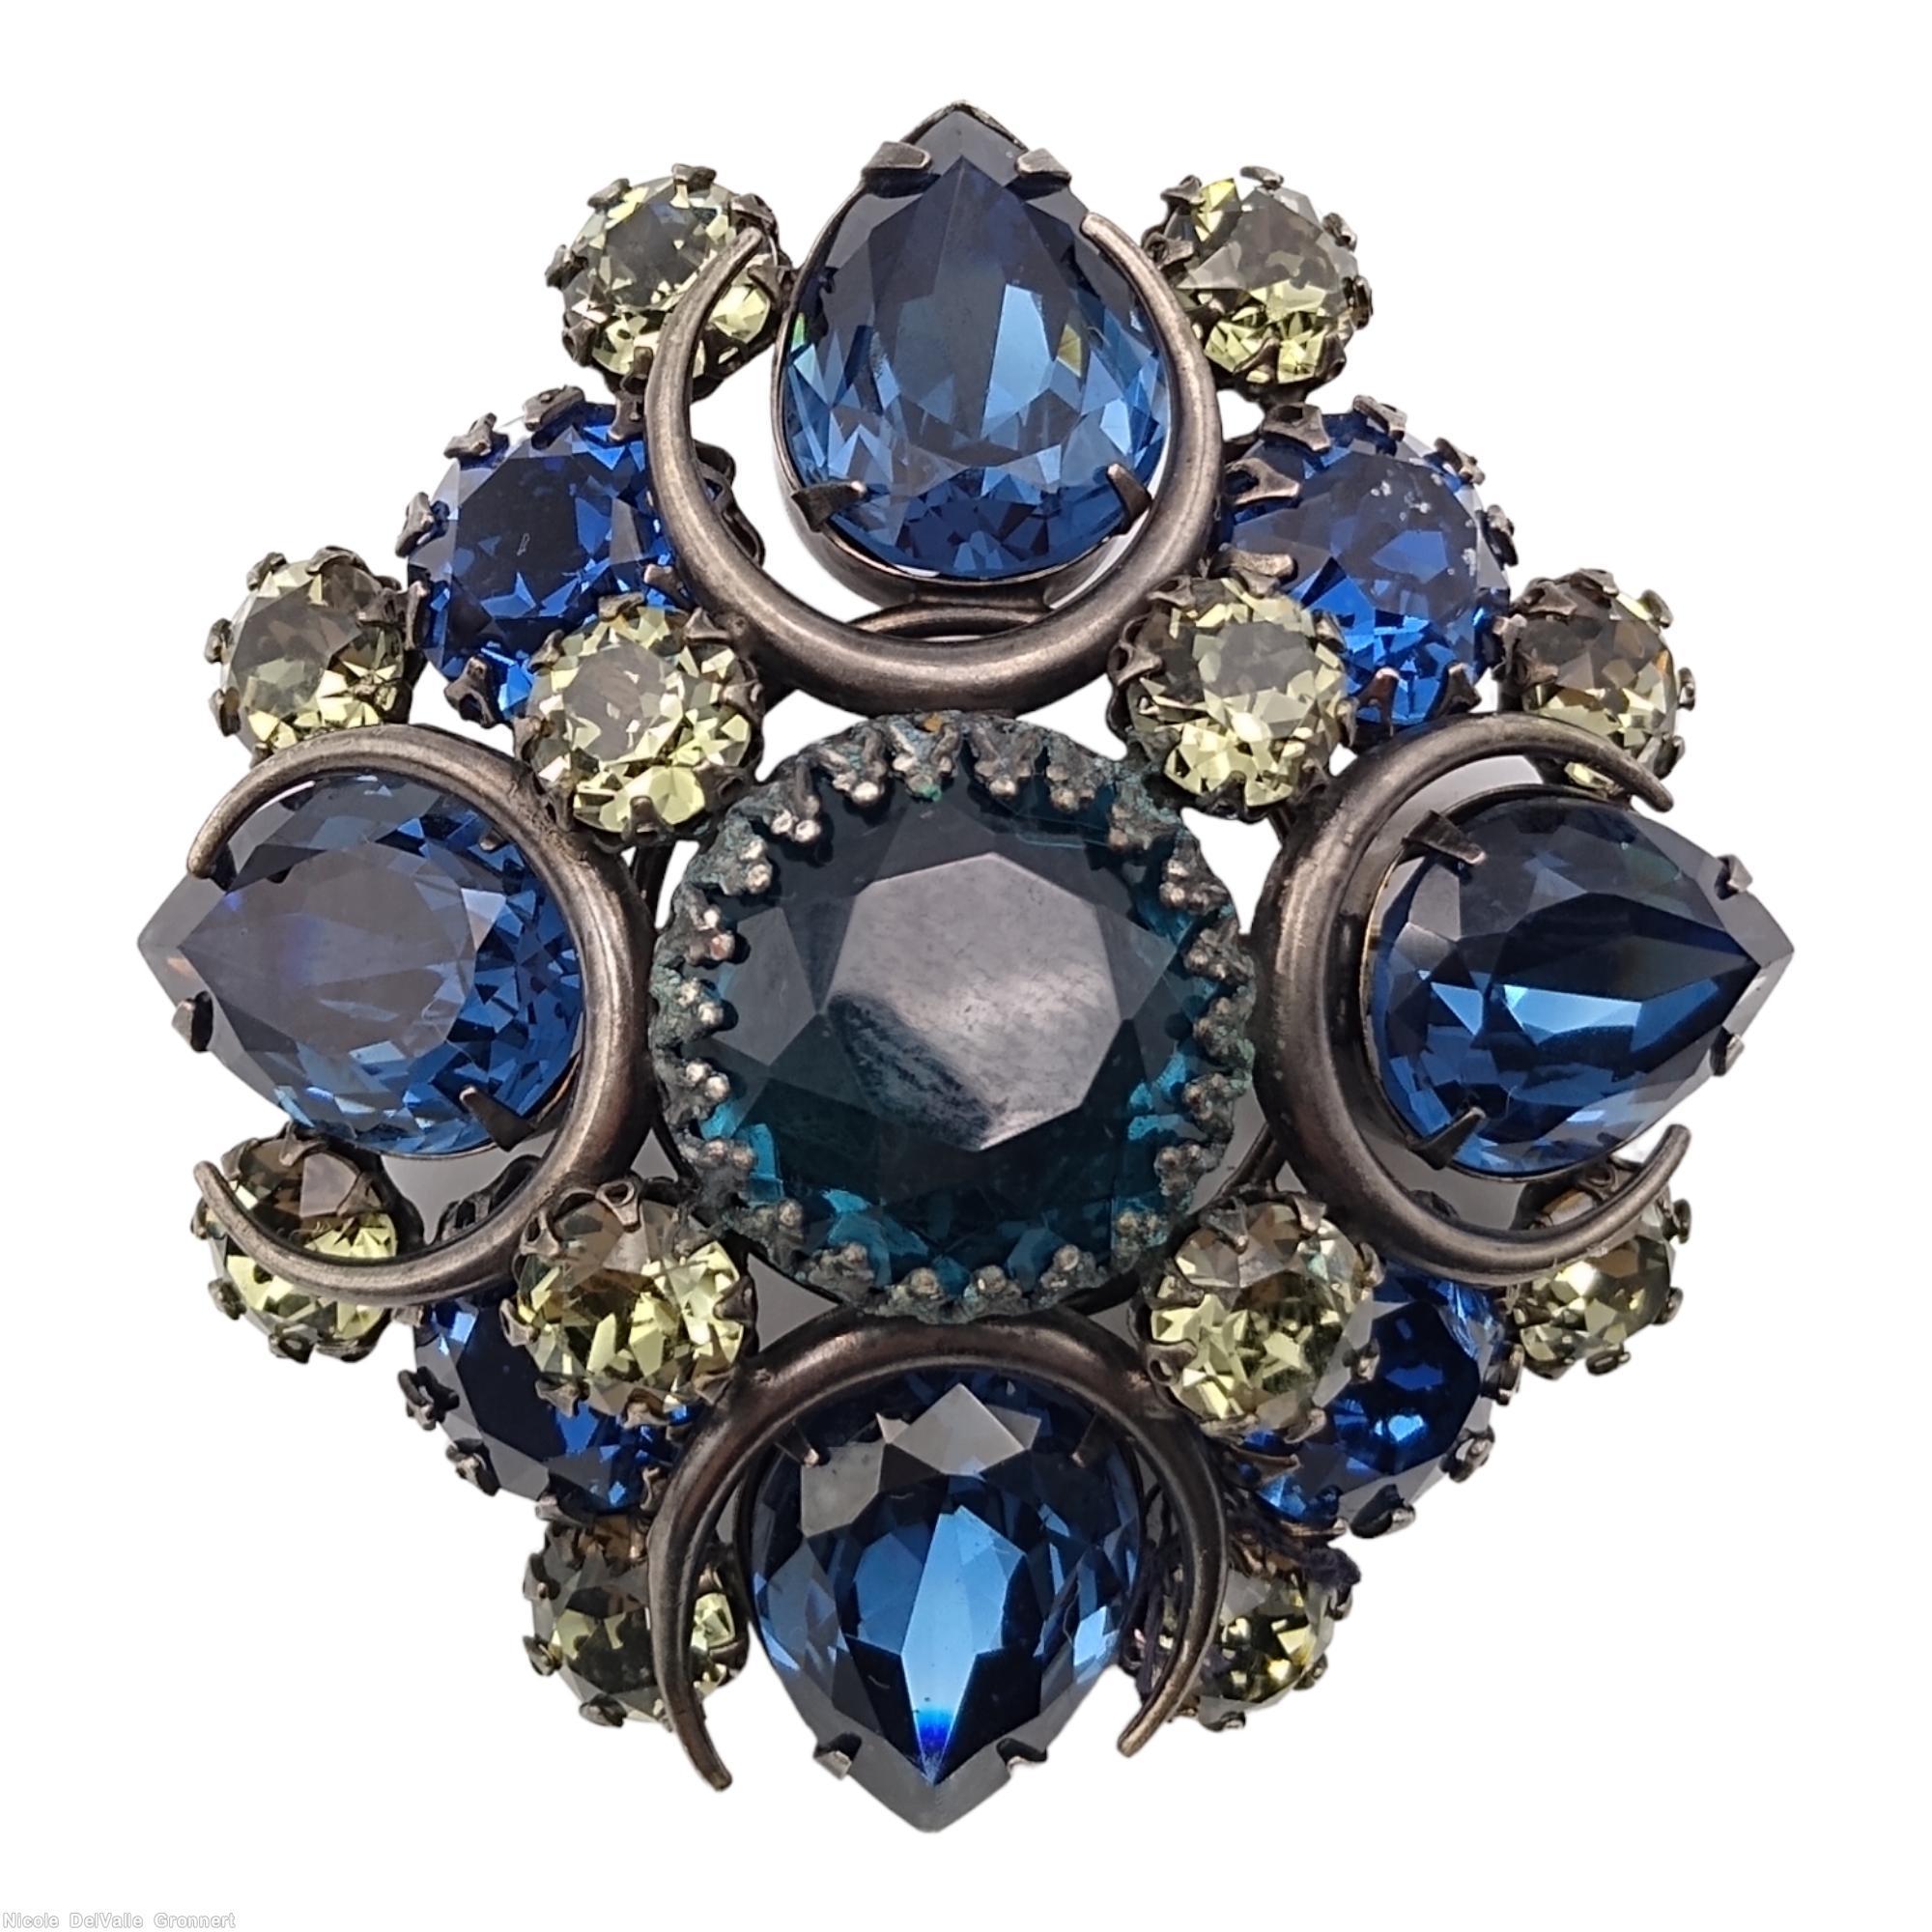 Schreiner 4 metal circle deco domed radial square pin 4 teardrop corner large chaton center navy blue large faceted teardrop clear champagne chaton jewelry